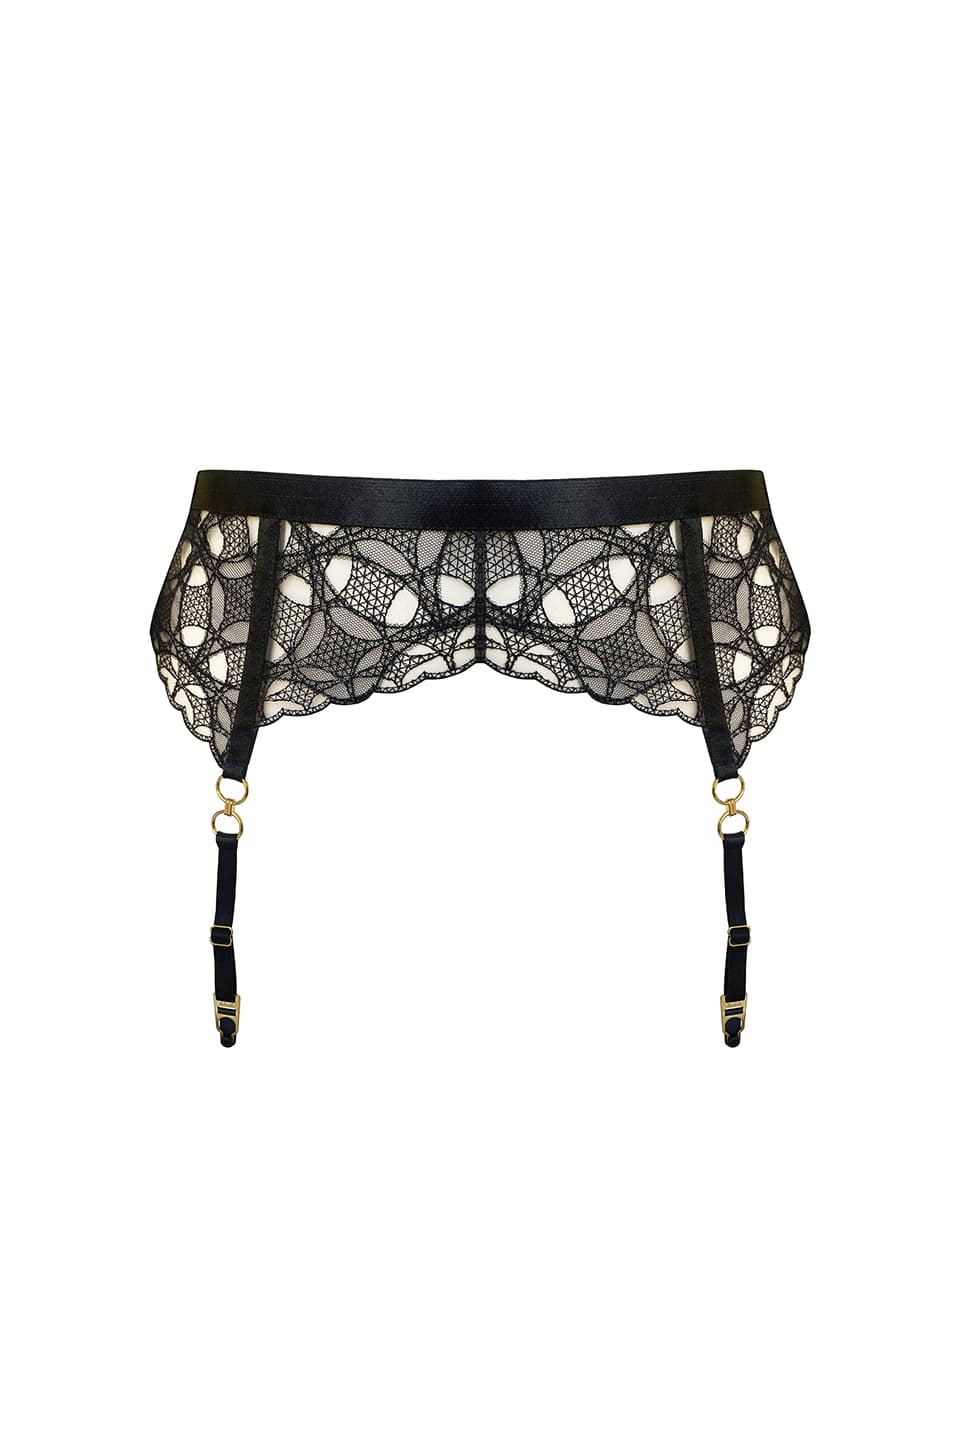 Shop online trendy Black Lingerie accessories from Bordelle Fashion designer. Product gallery 1